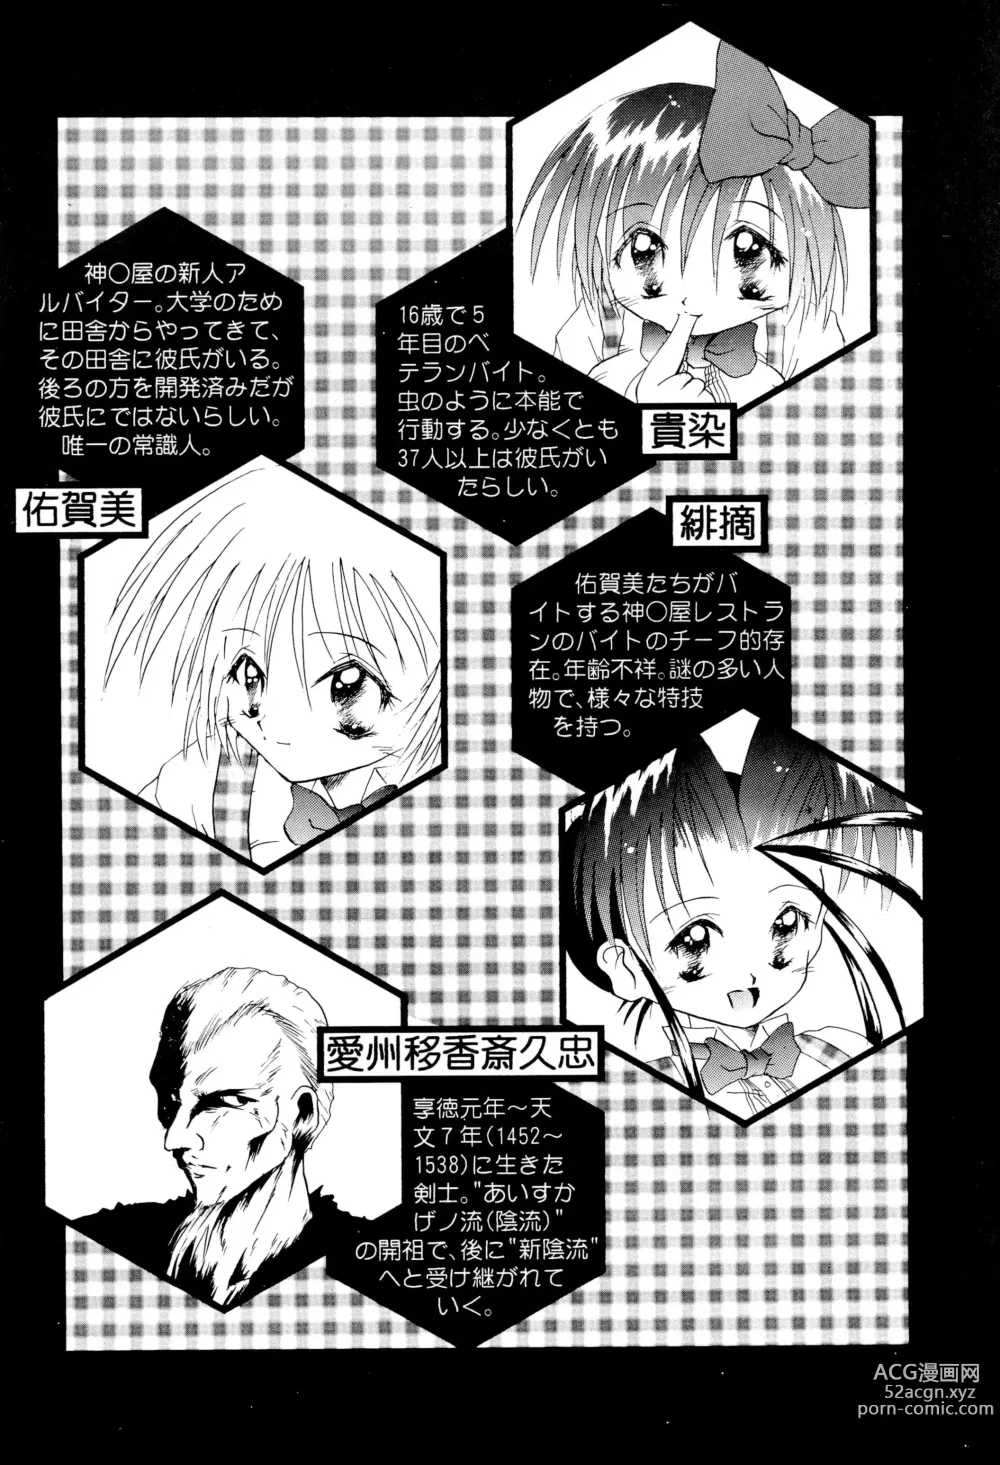 Page 10 of doujinshi Get Sweet ”A” Low Phone